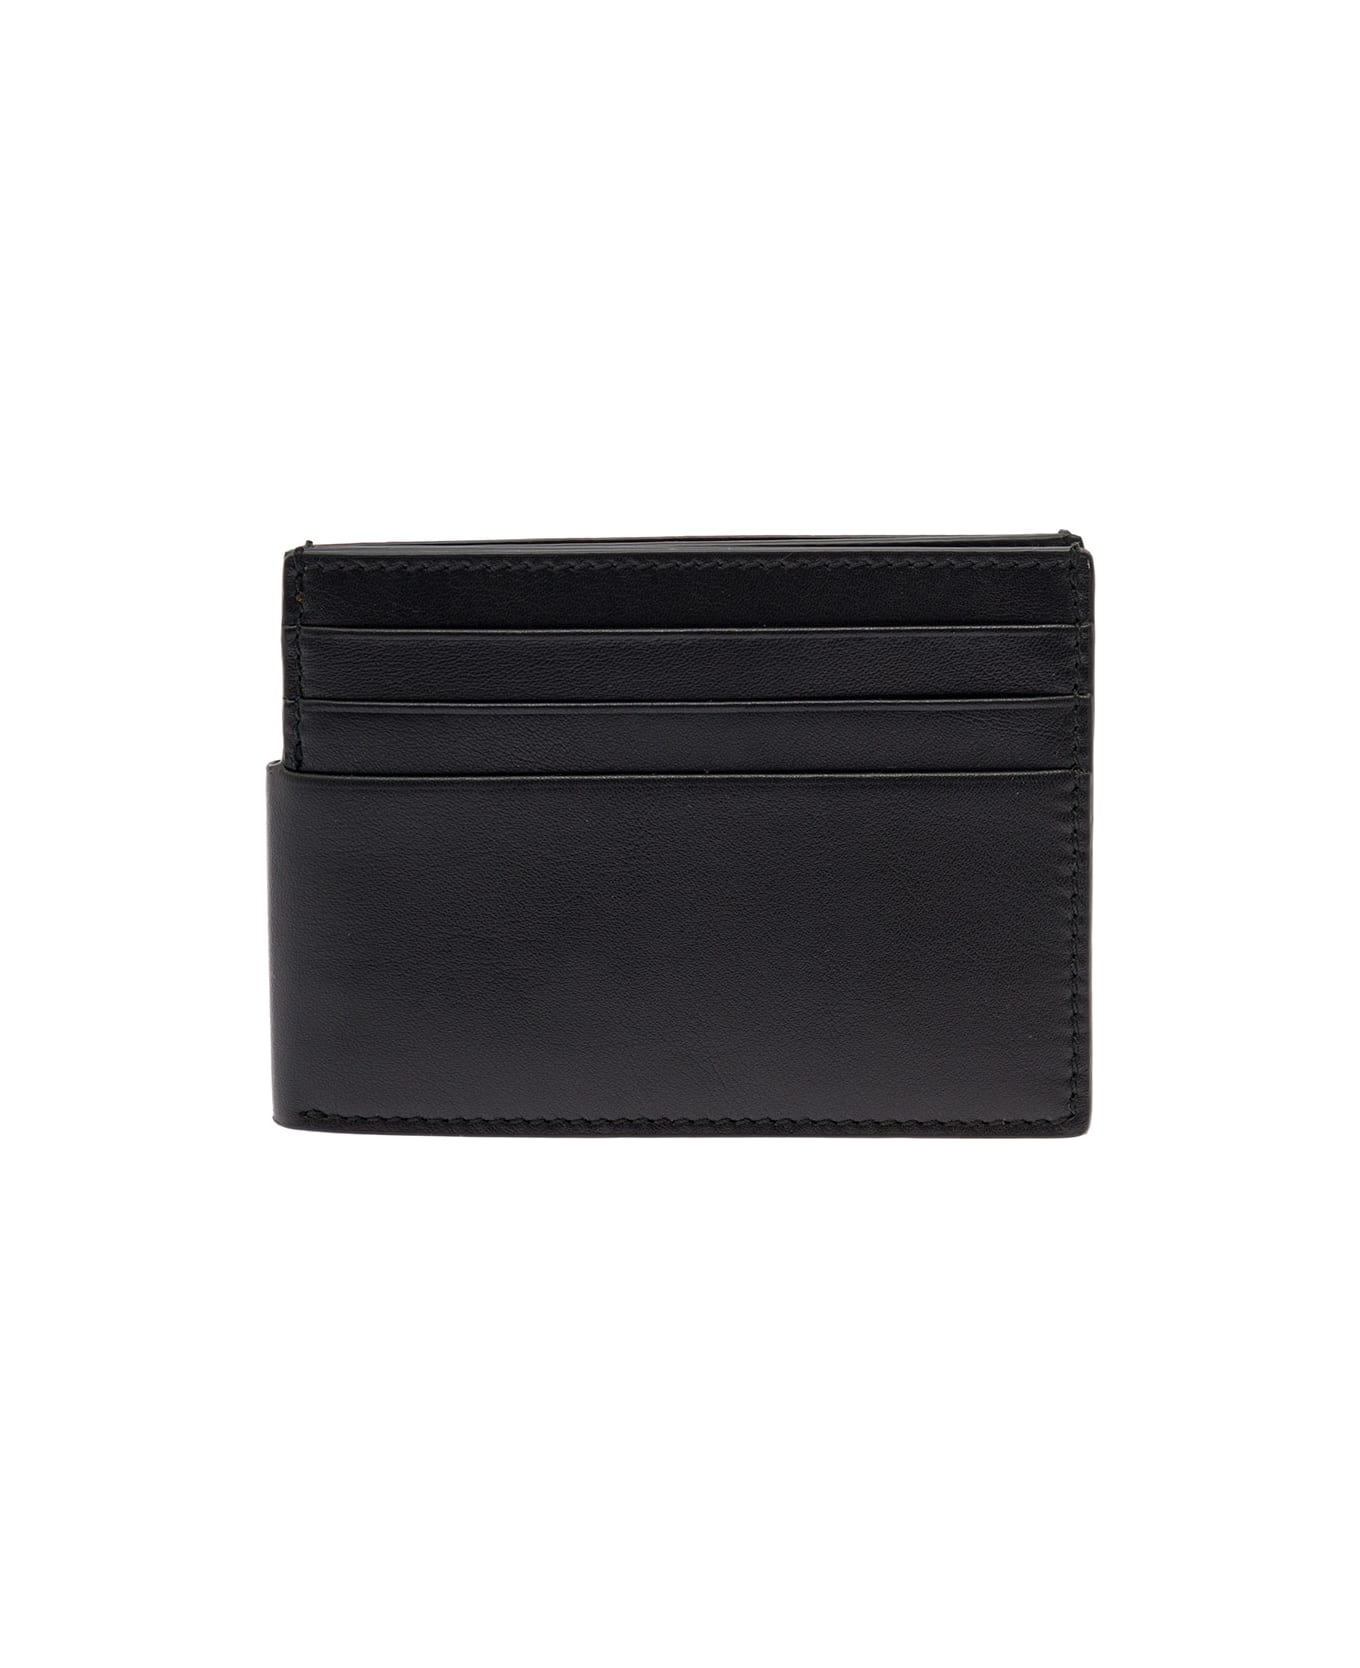 Alexander McQueen Black Double Card-holder With Contrasting Lettering In Leather Man Alexander Mcqueen - Black